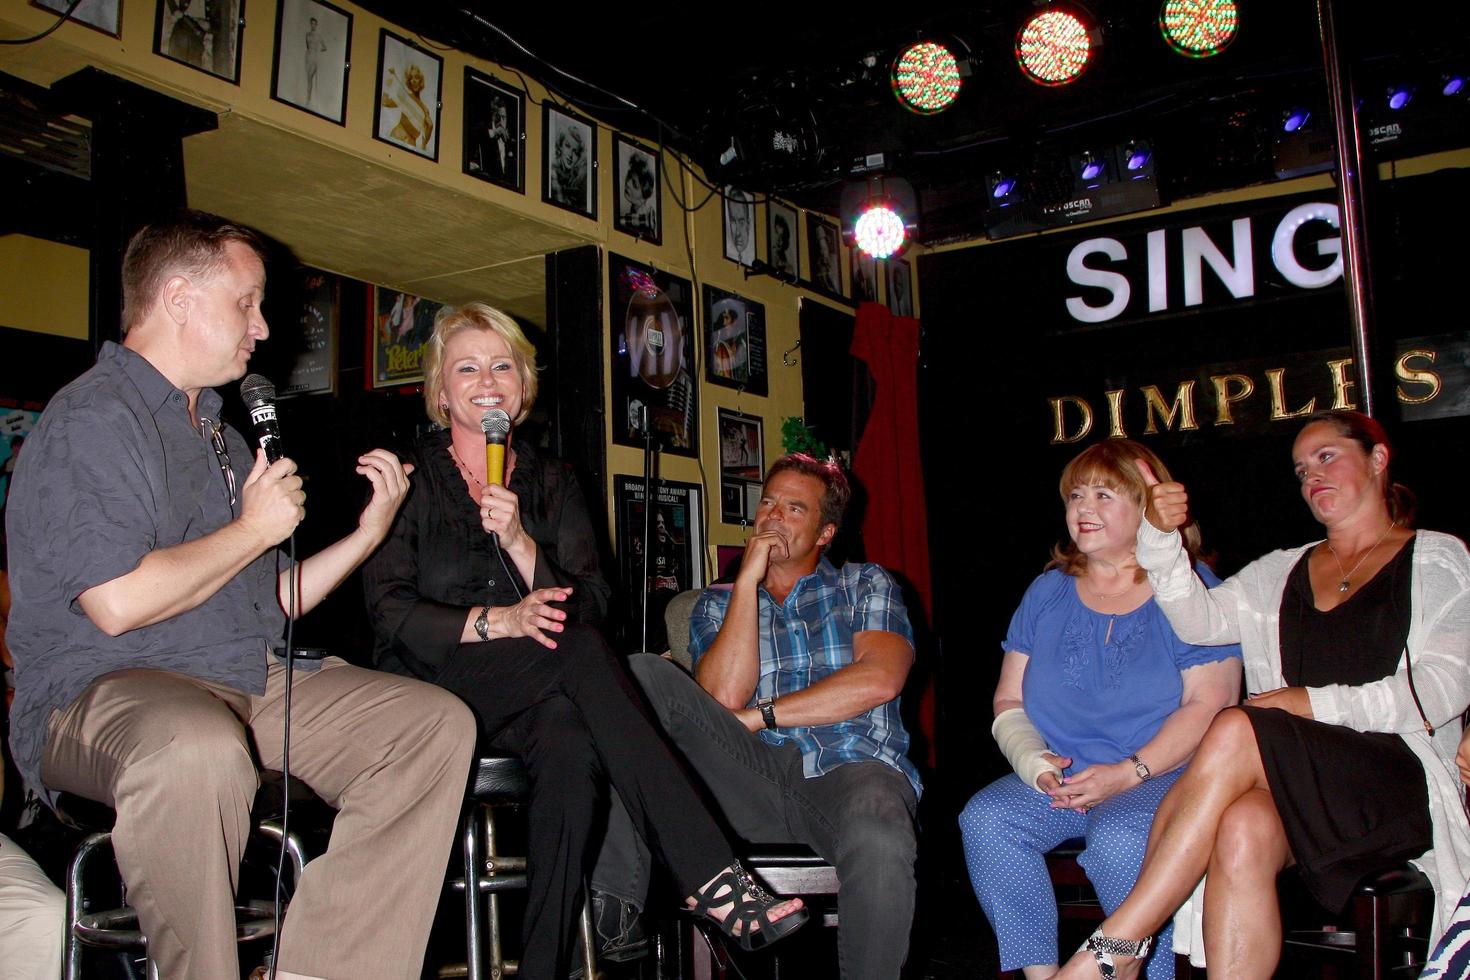 LOS ANGELES, JUN 1 - Michael Maloney, Judi Evans, Wally Kurth, Patrika Darbo, Crystal Chappell at the Judi Evans Celebrates 30 years in Show Business event at the Dimples on June 1, 2013 in Burbank, CA photo